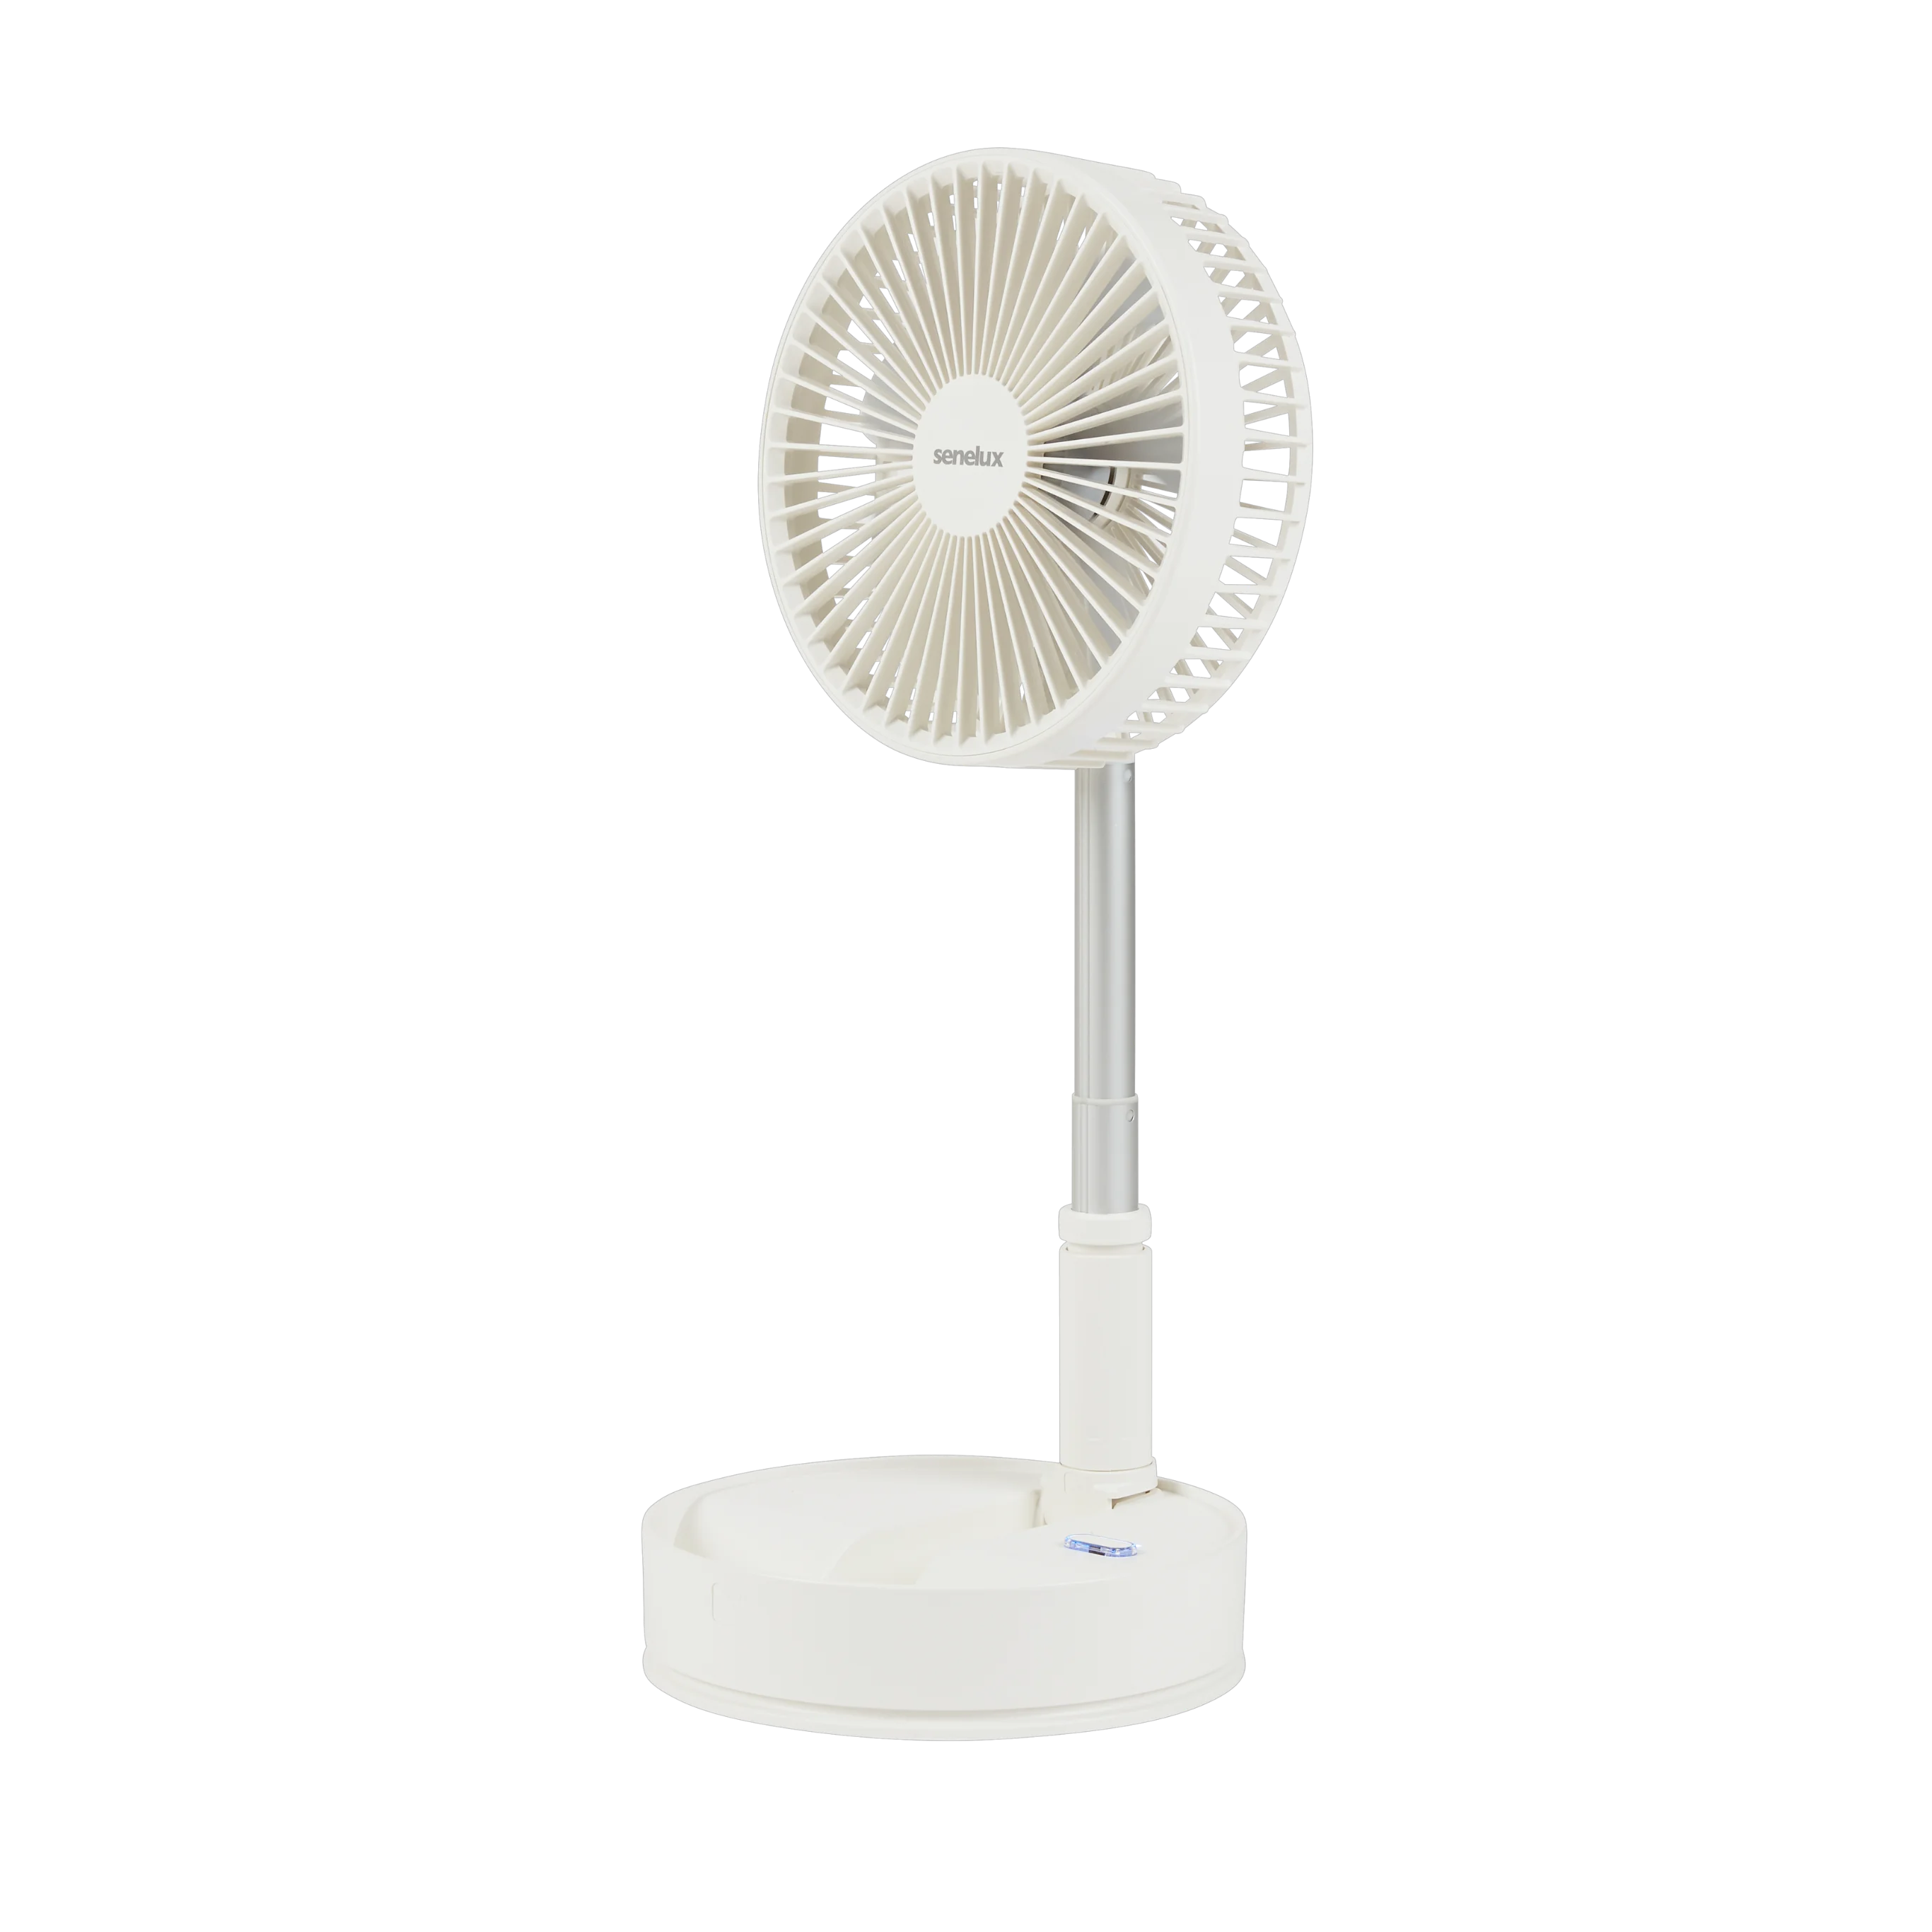 An image of the Senelux fully folding, rechargeable battery powered fan with telescopic neck and white design.